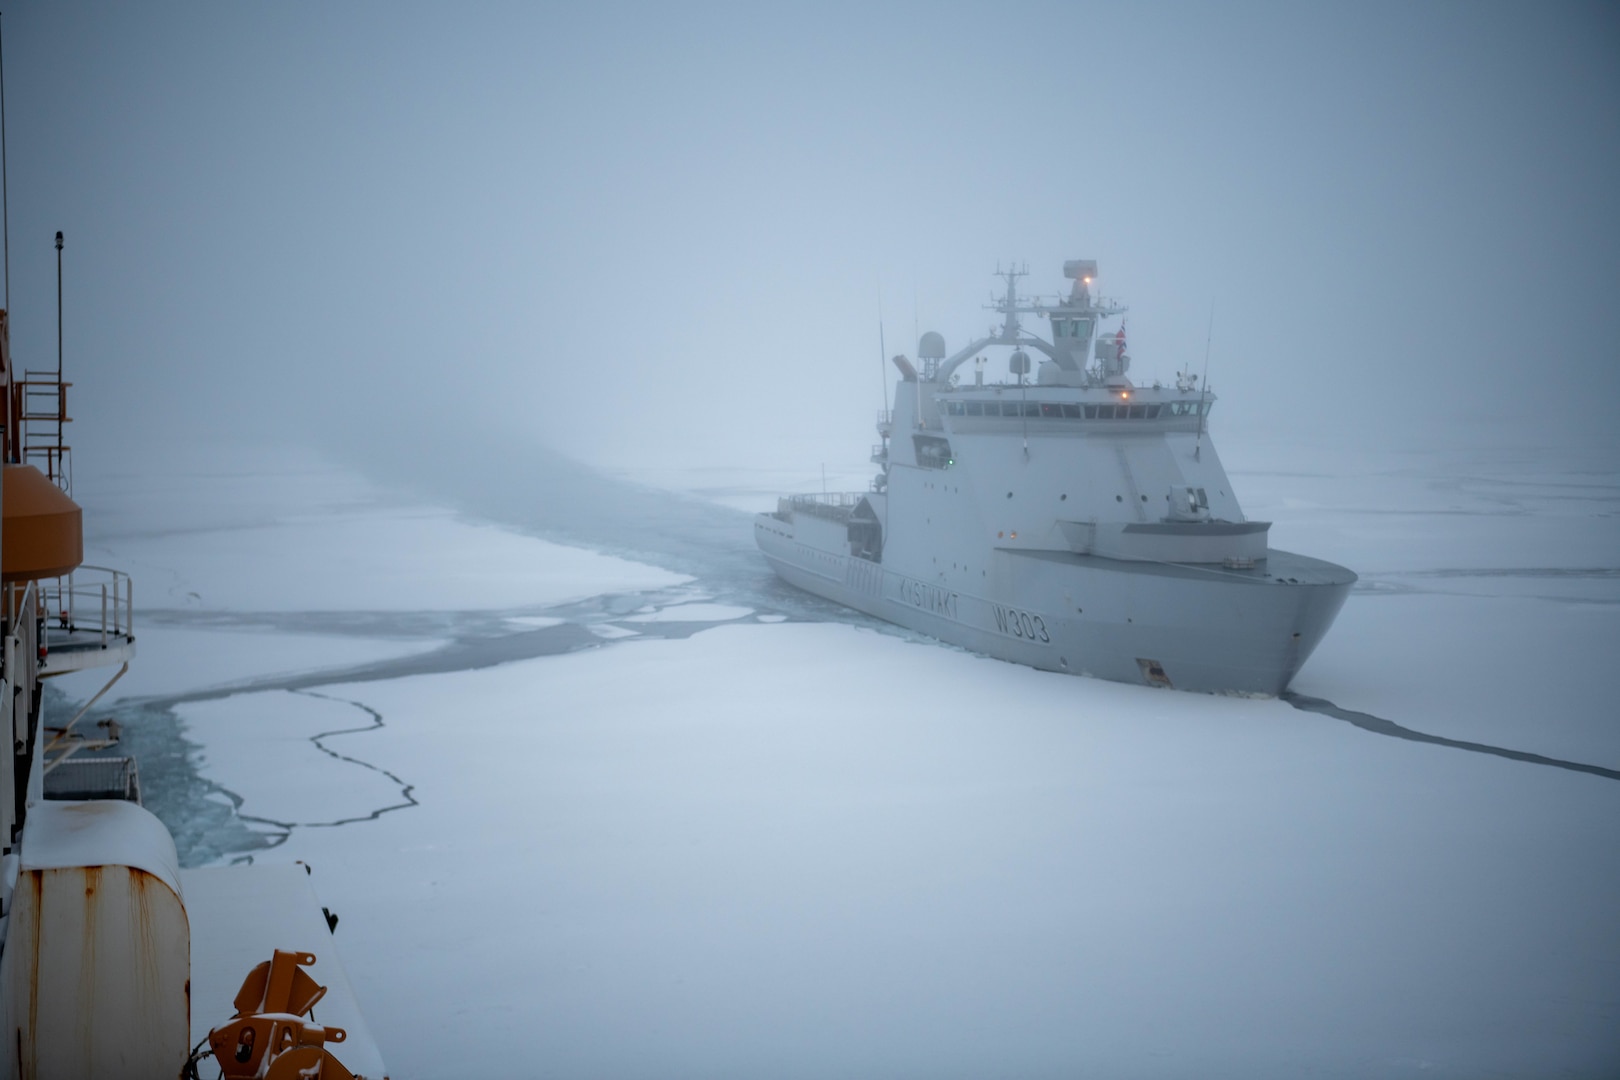 U.S. Coast Guard Cutter Healy (WAGB 20) and Norwegian Coast Guard Vessel Svalbard steam in formation through ice on Sep. 27, 2023, in the Barents Sea while en route to conduct joint exercises in northern Norway. The Healy is deployed to the arctic to develop interoperability with allies and to support responsibilities and shared interests throughout the Arctic region. (U.S. Department of Defense photo by Sgt. Carter Acton)